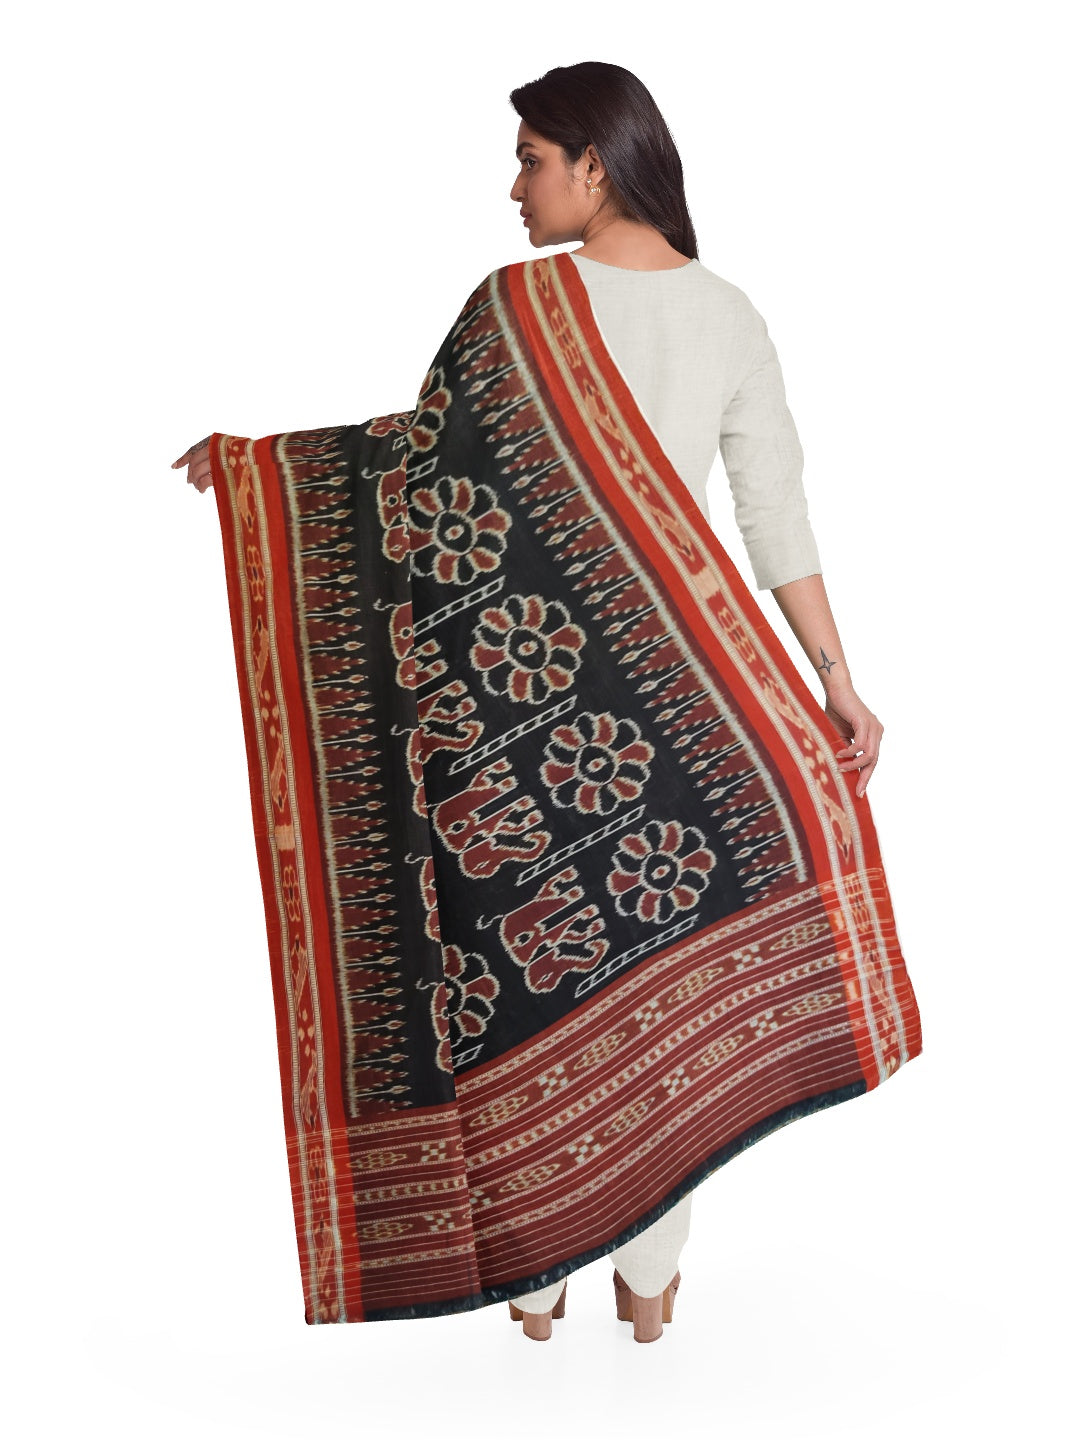 Black and Rust Cotton ikat Dupatta with elephant and flower motifs woven